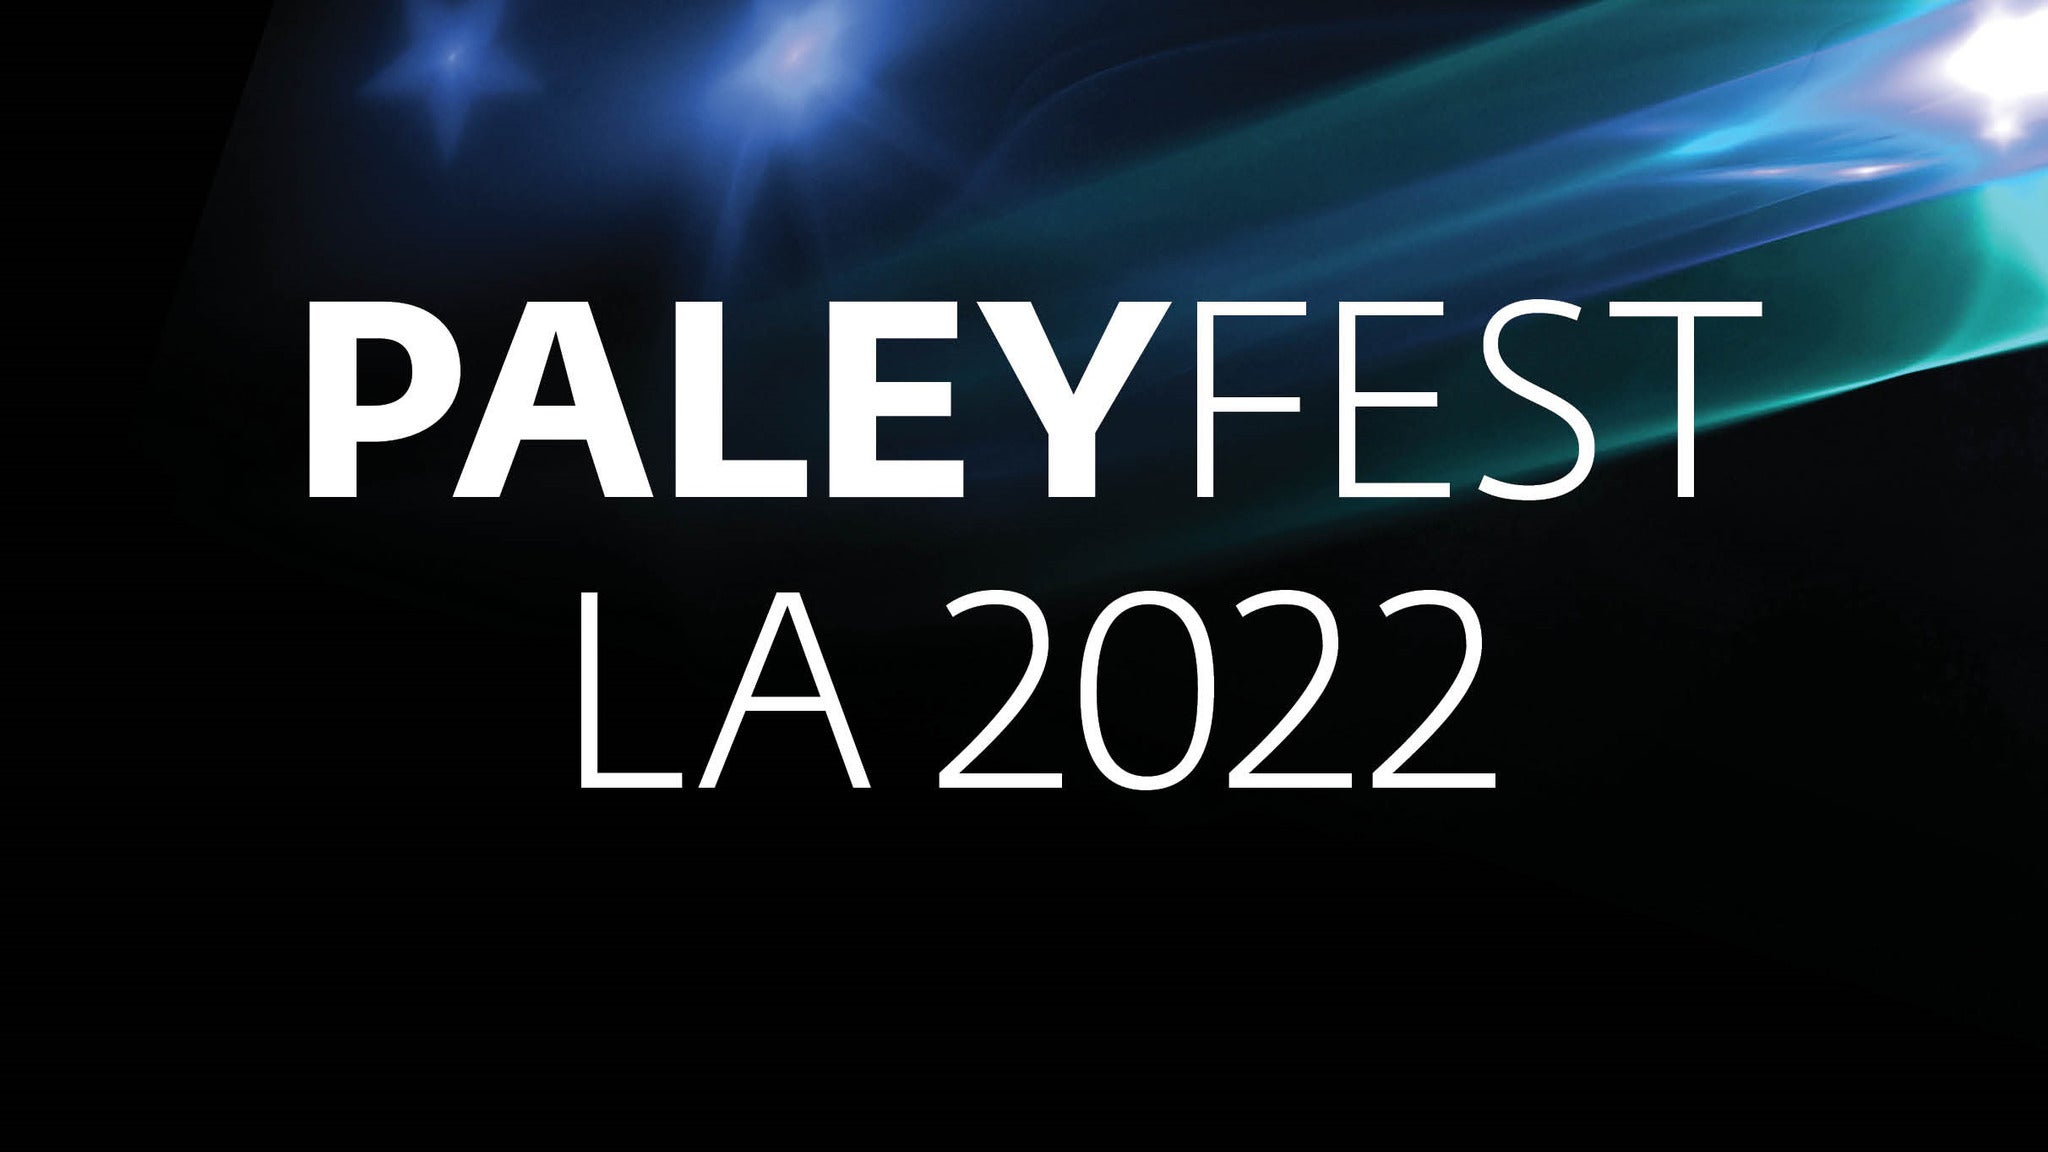 PaleyFest:Premium Combo Pass B-black-ish,Better Call Saul,Emily in Par in Hollywood promo photo for Paley General Member on sale presale offer code